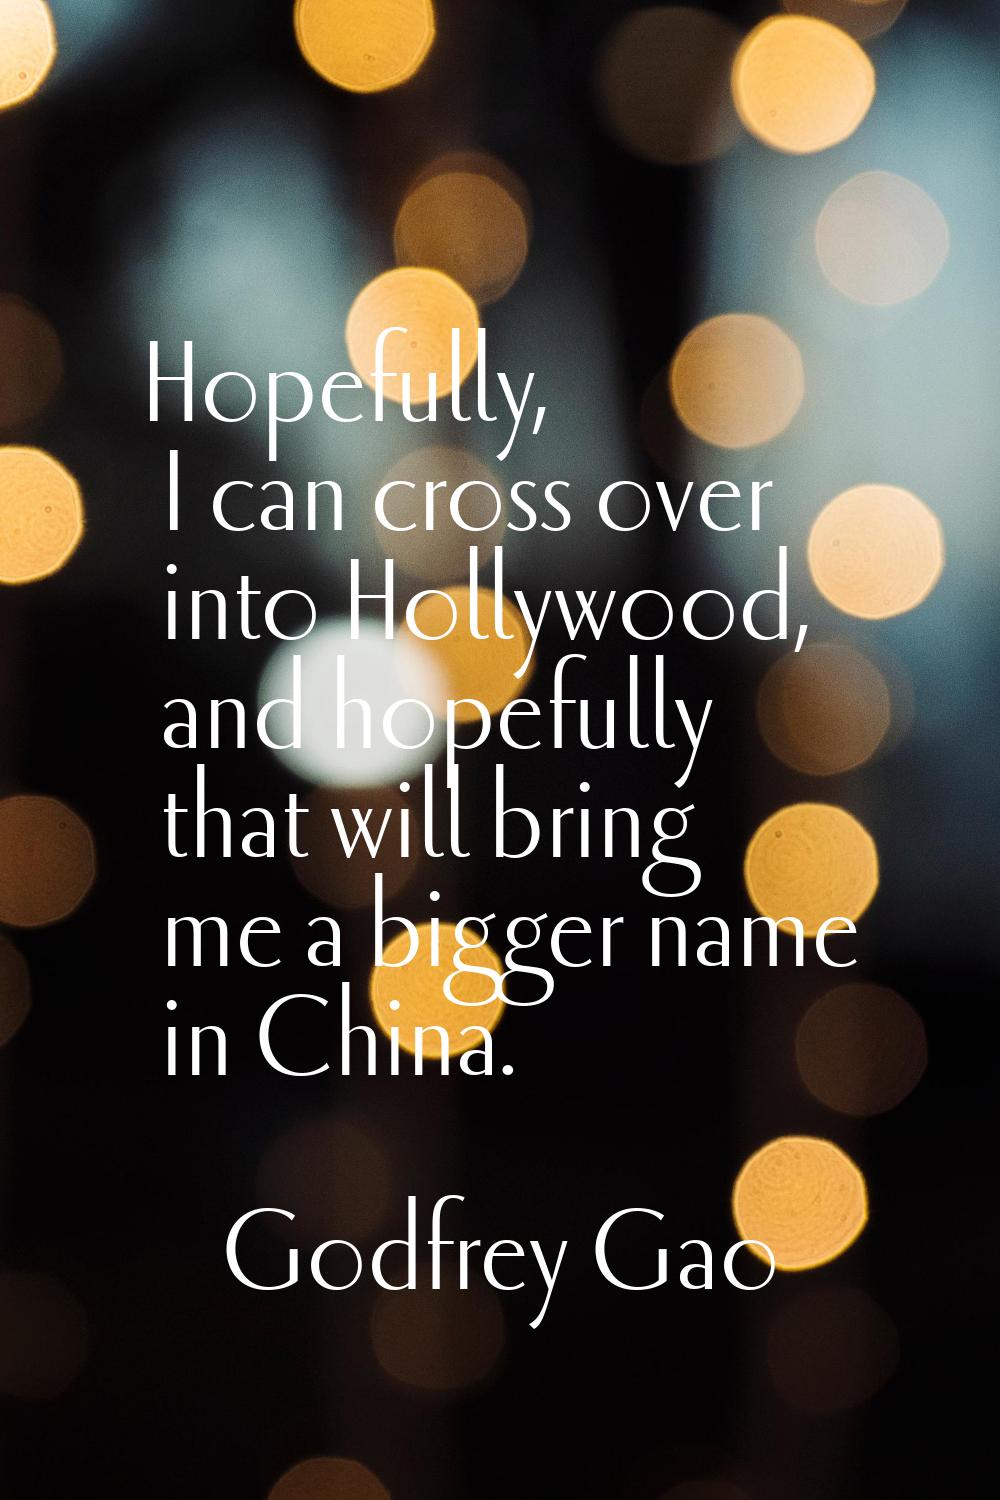 Hopefully, I can cross over into Hollywood, and hopefully that will bring me a bigger name in China